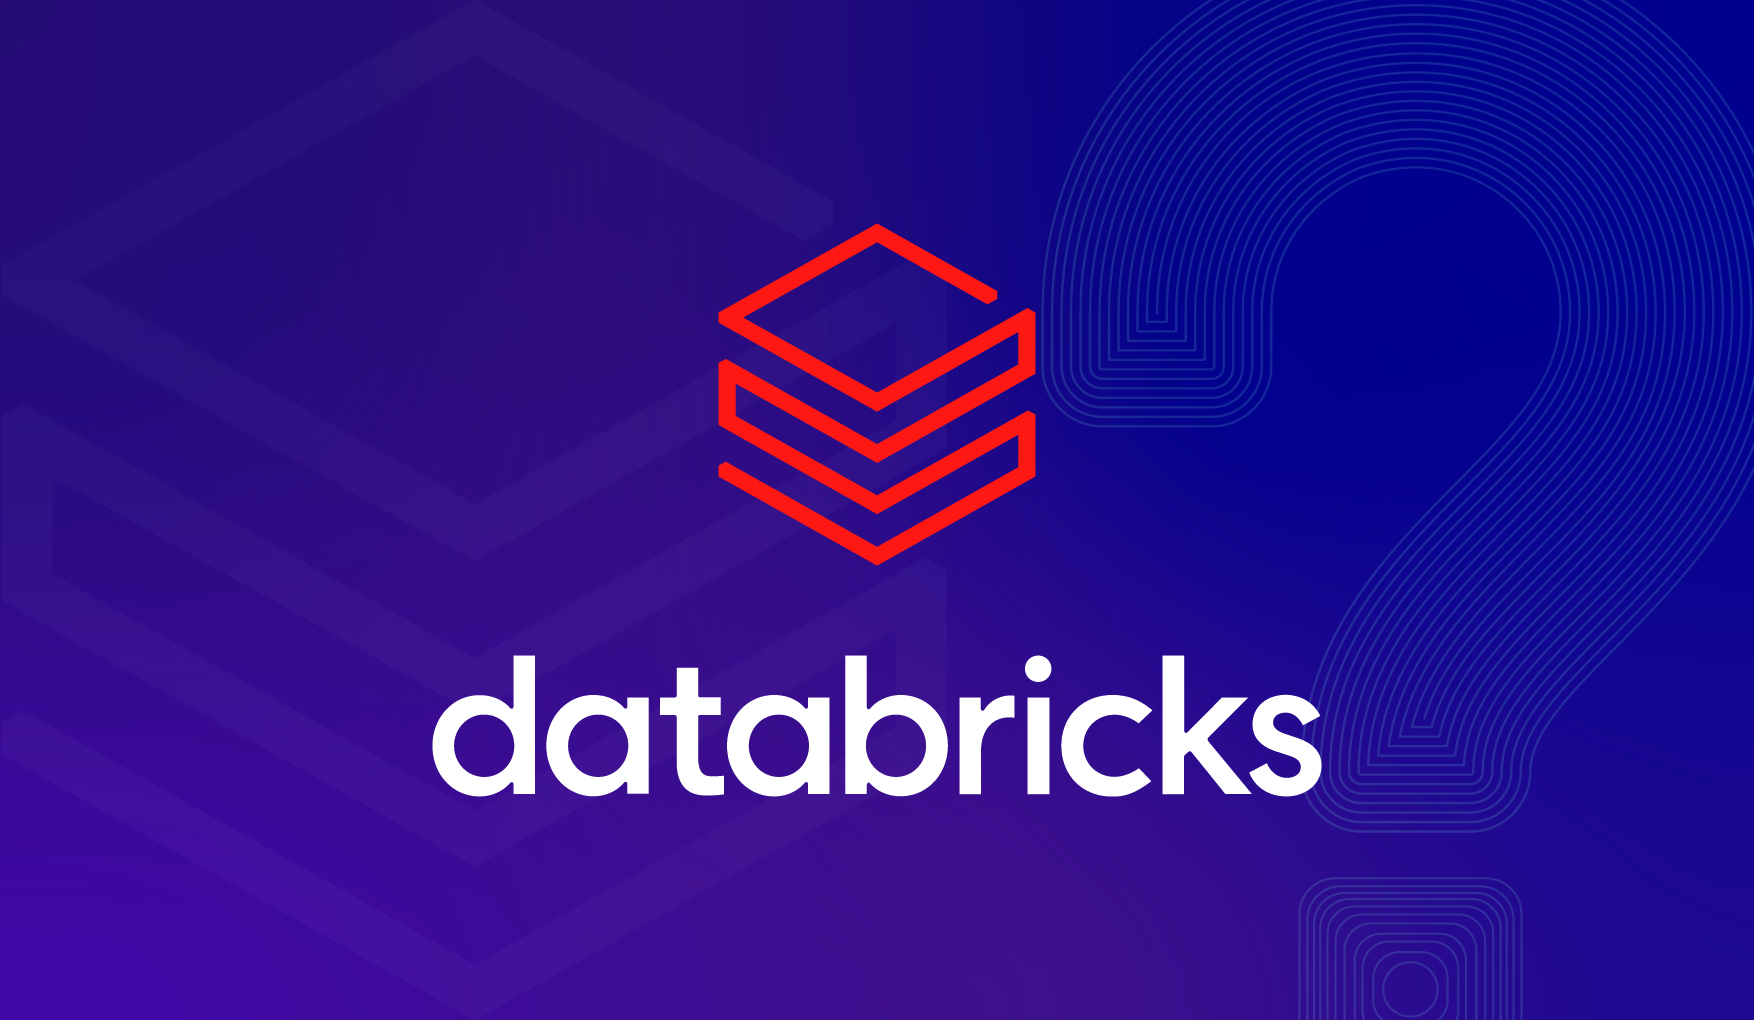 Databricks : What Is It and What’s It Used For?